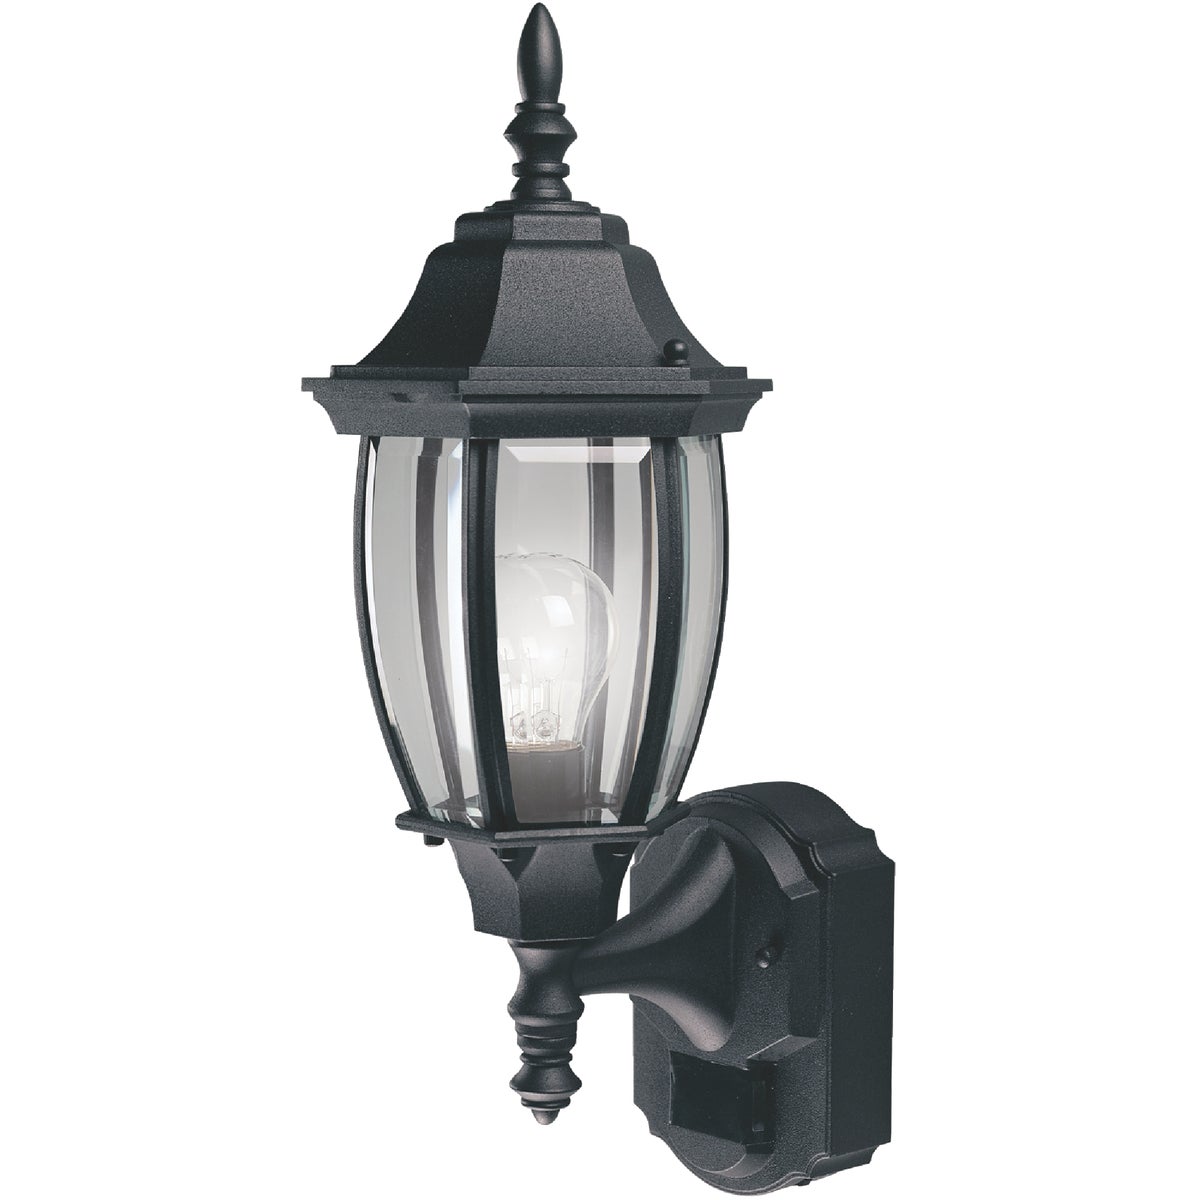 Item 536253, Coach style wall lantern with steel plated housing has selectable light 